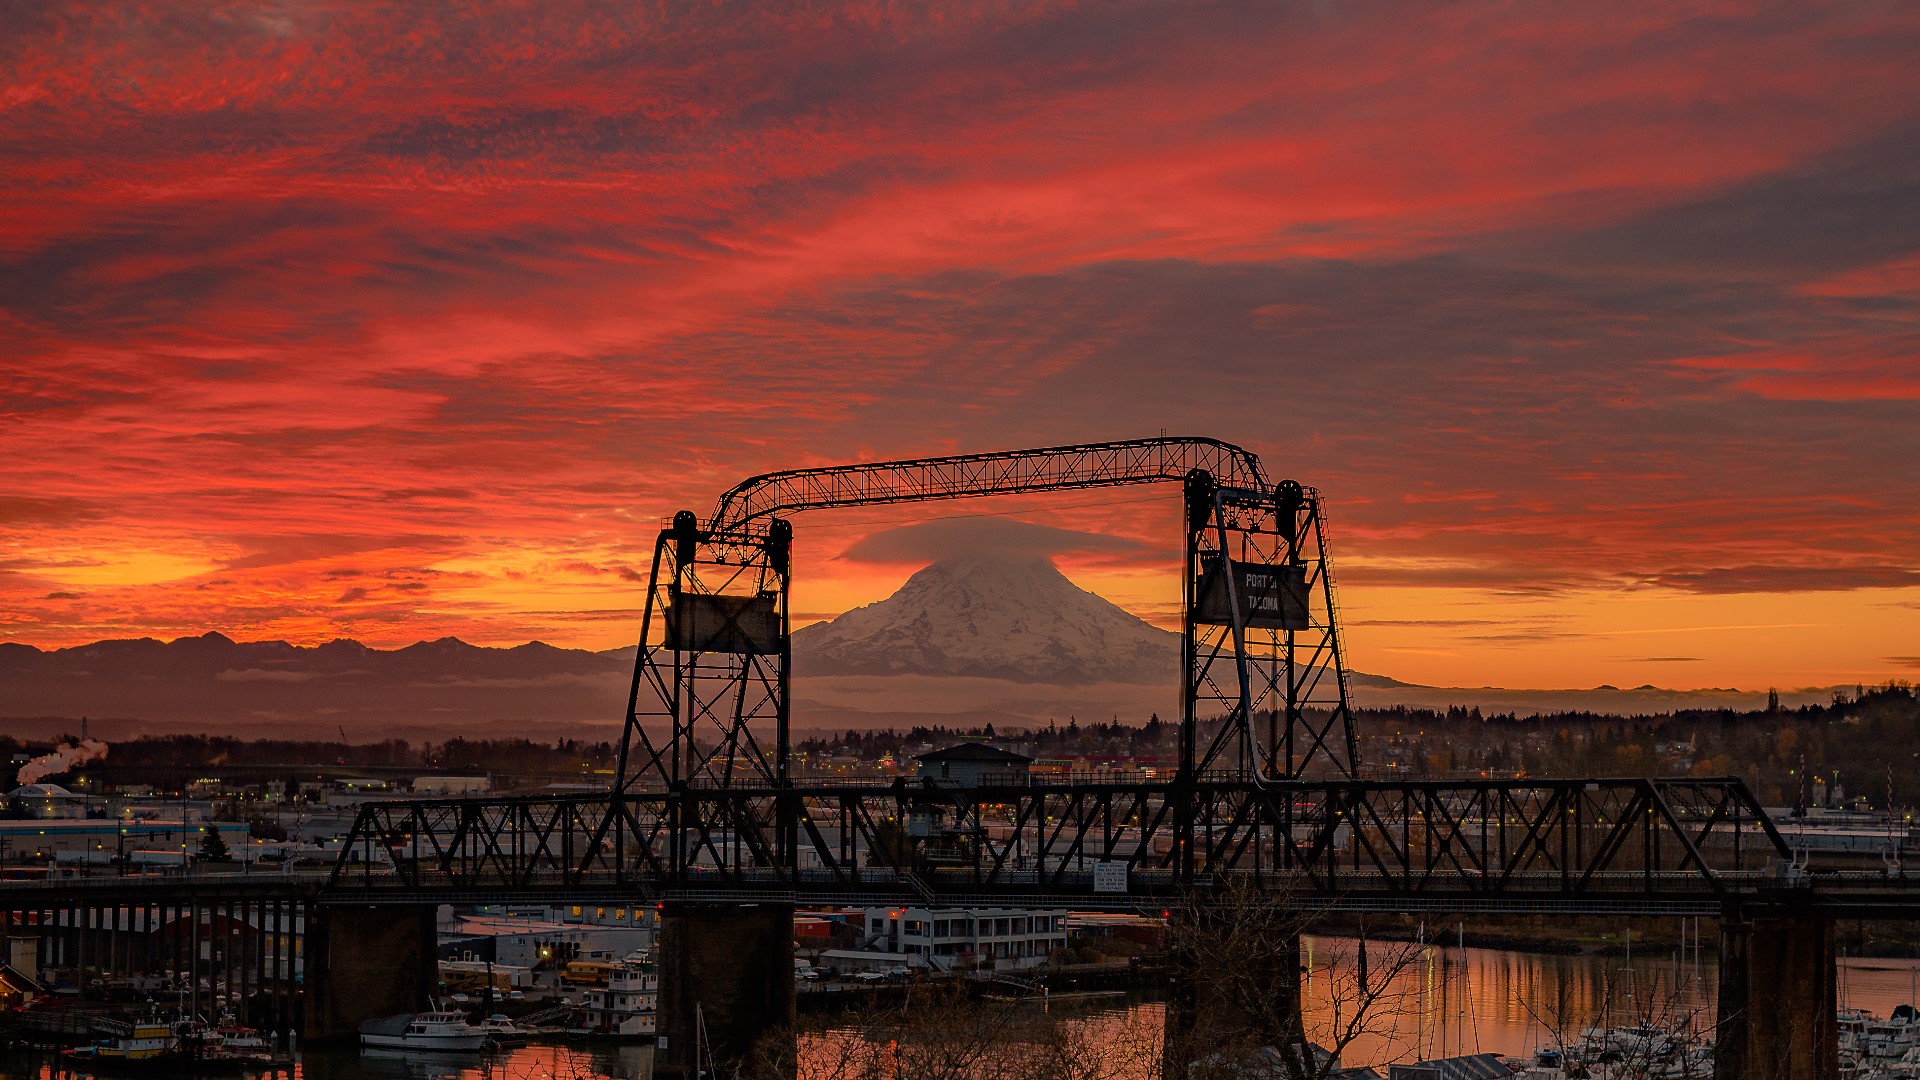 Early riser Michael Weldon Johnson captures the morning light so the rest of us can sleep in. #k5evening